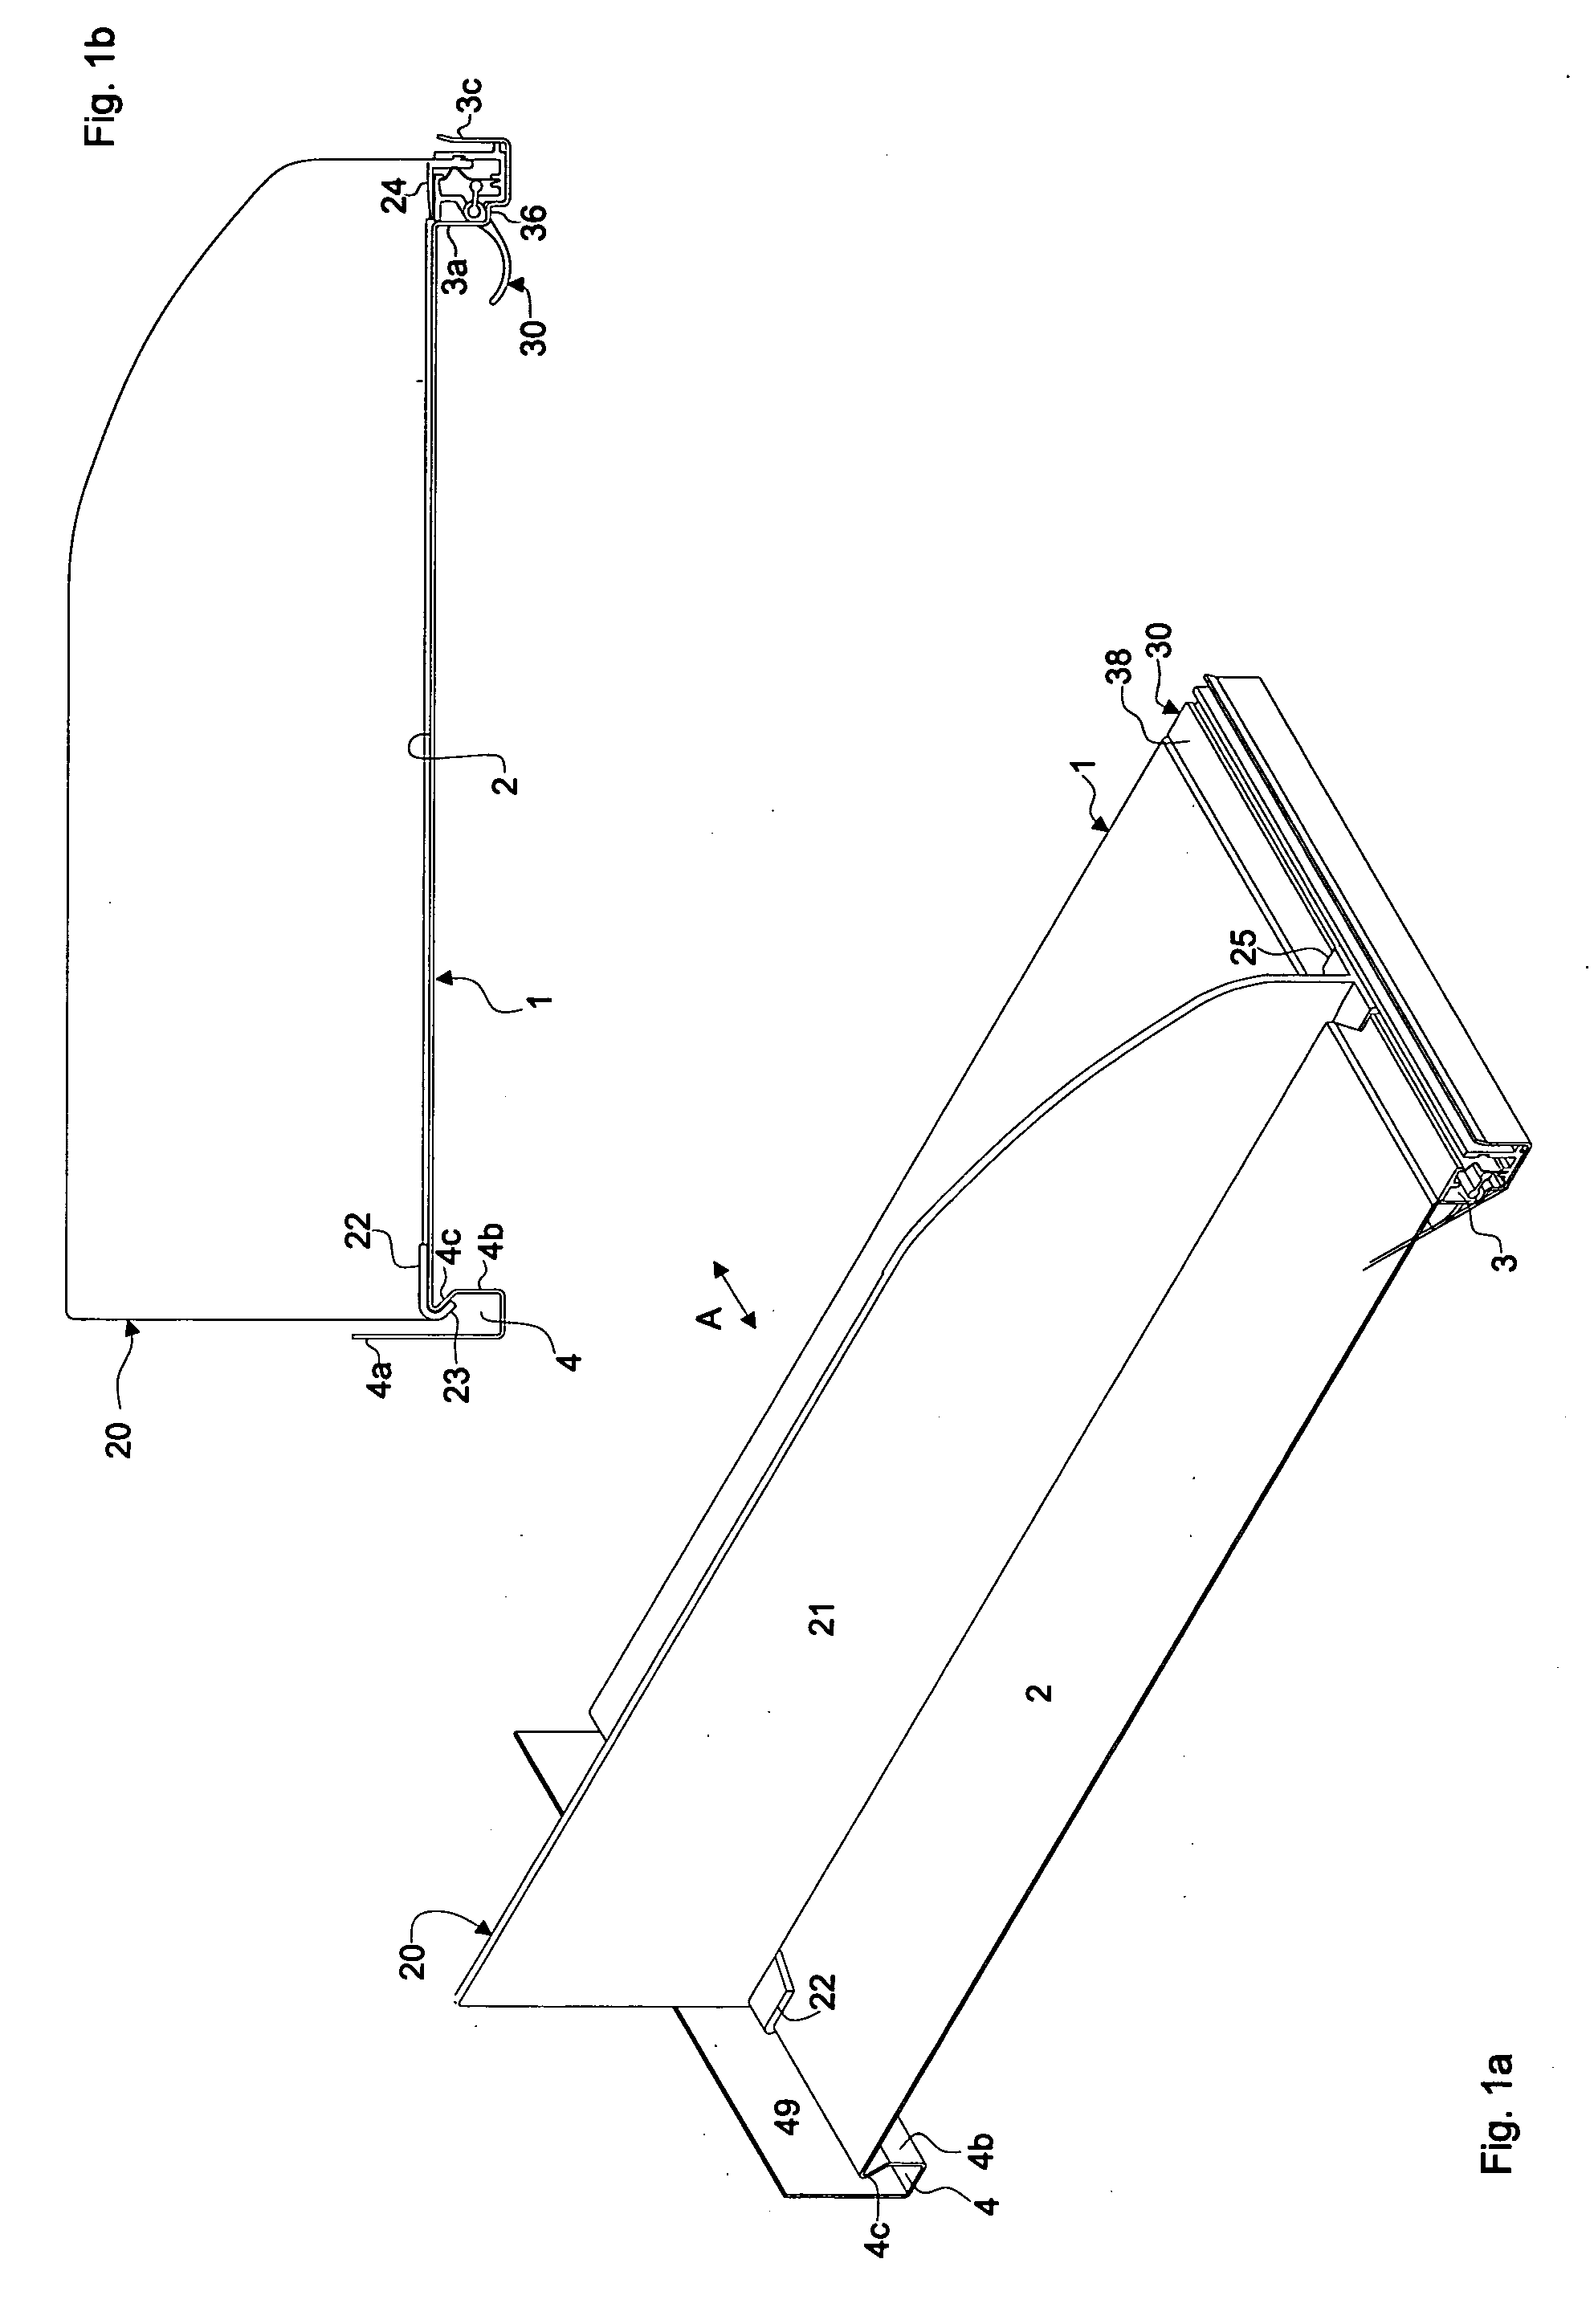 System for attaching accessories to a shelf